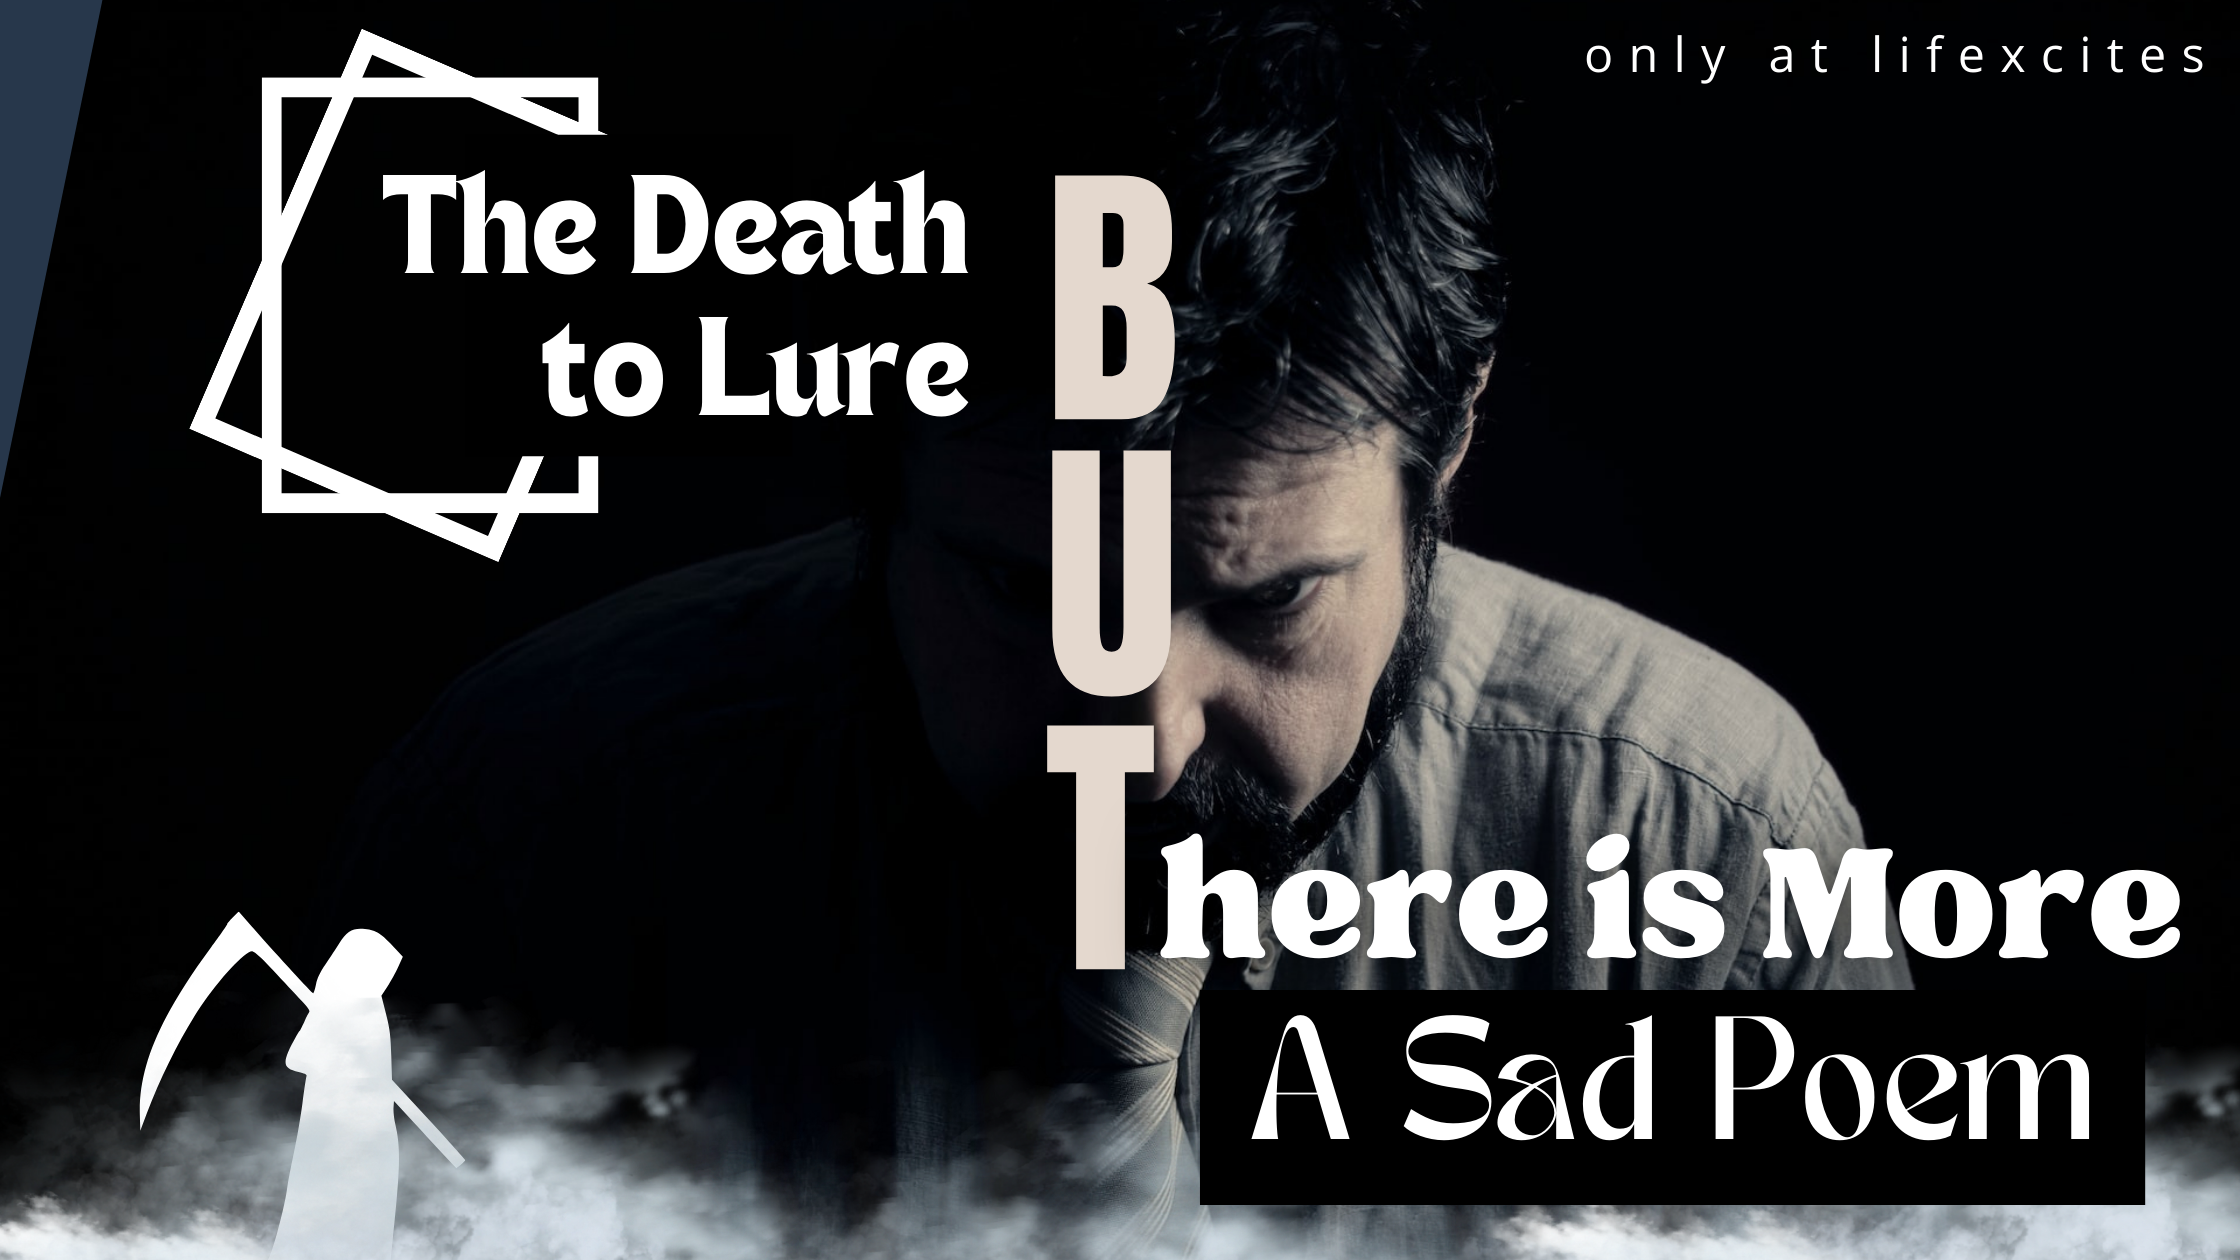 Death to Lure, But There is More Sadness: A Sad Poem